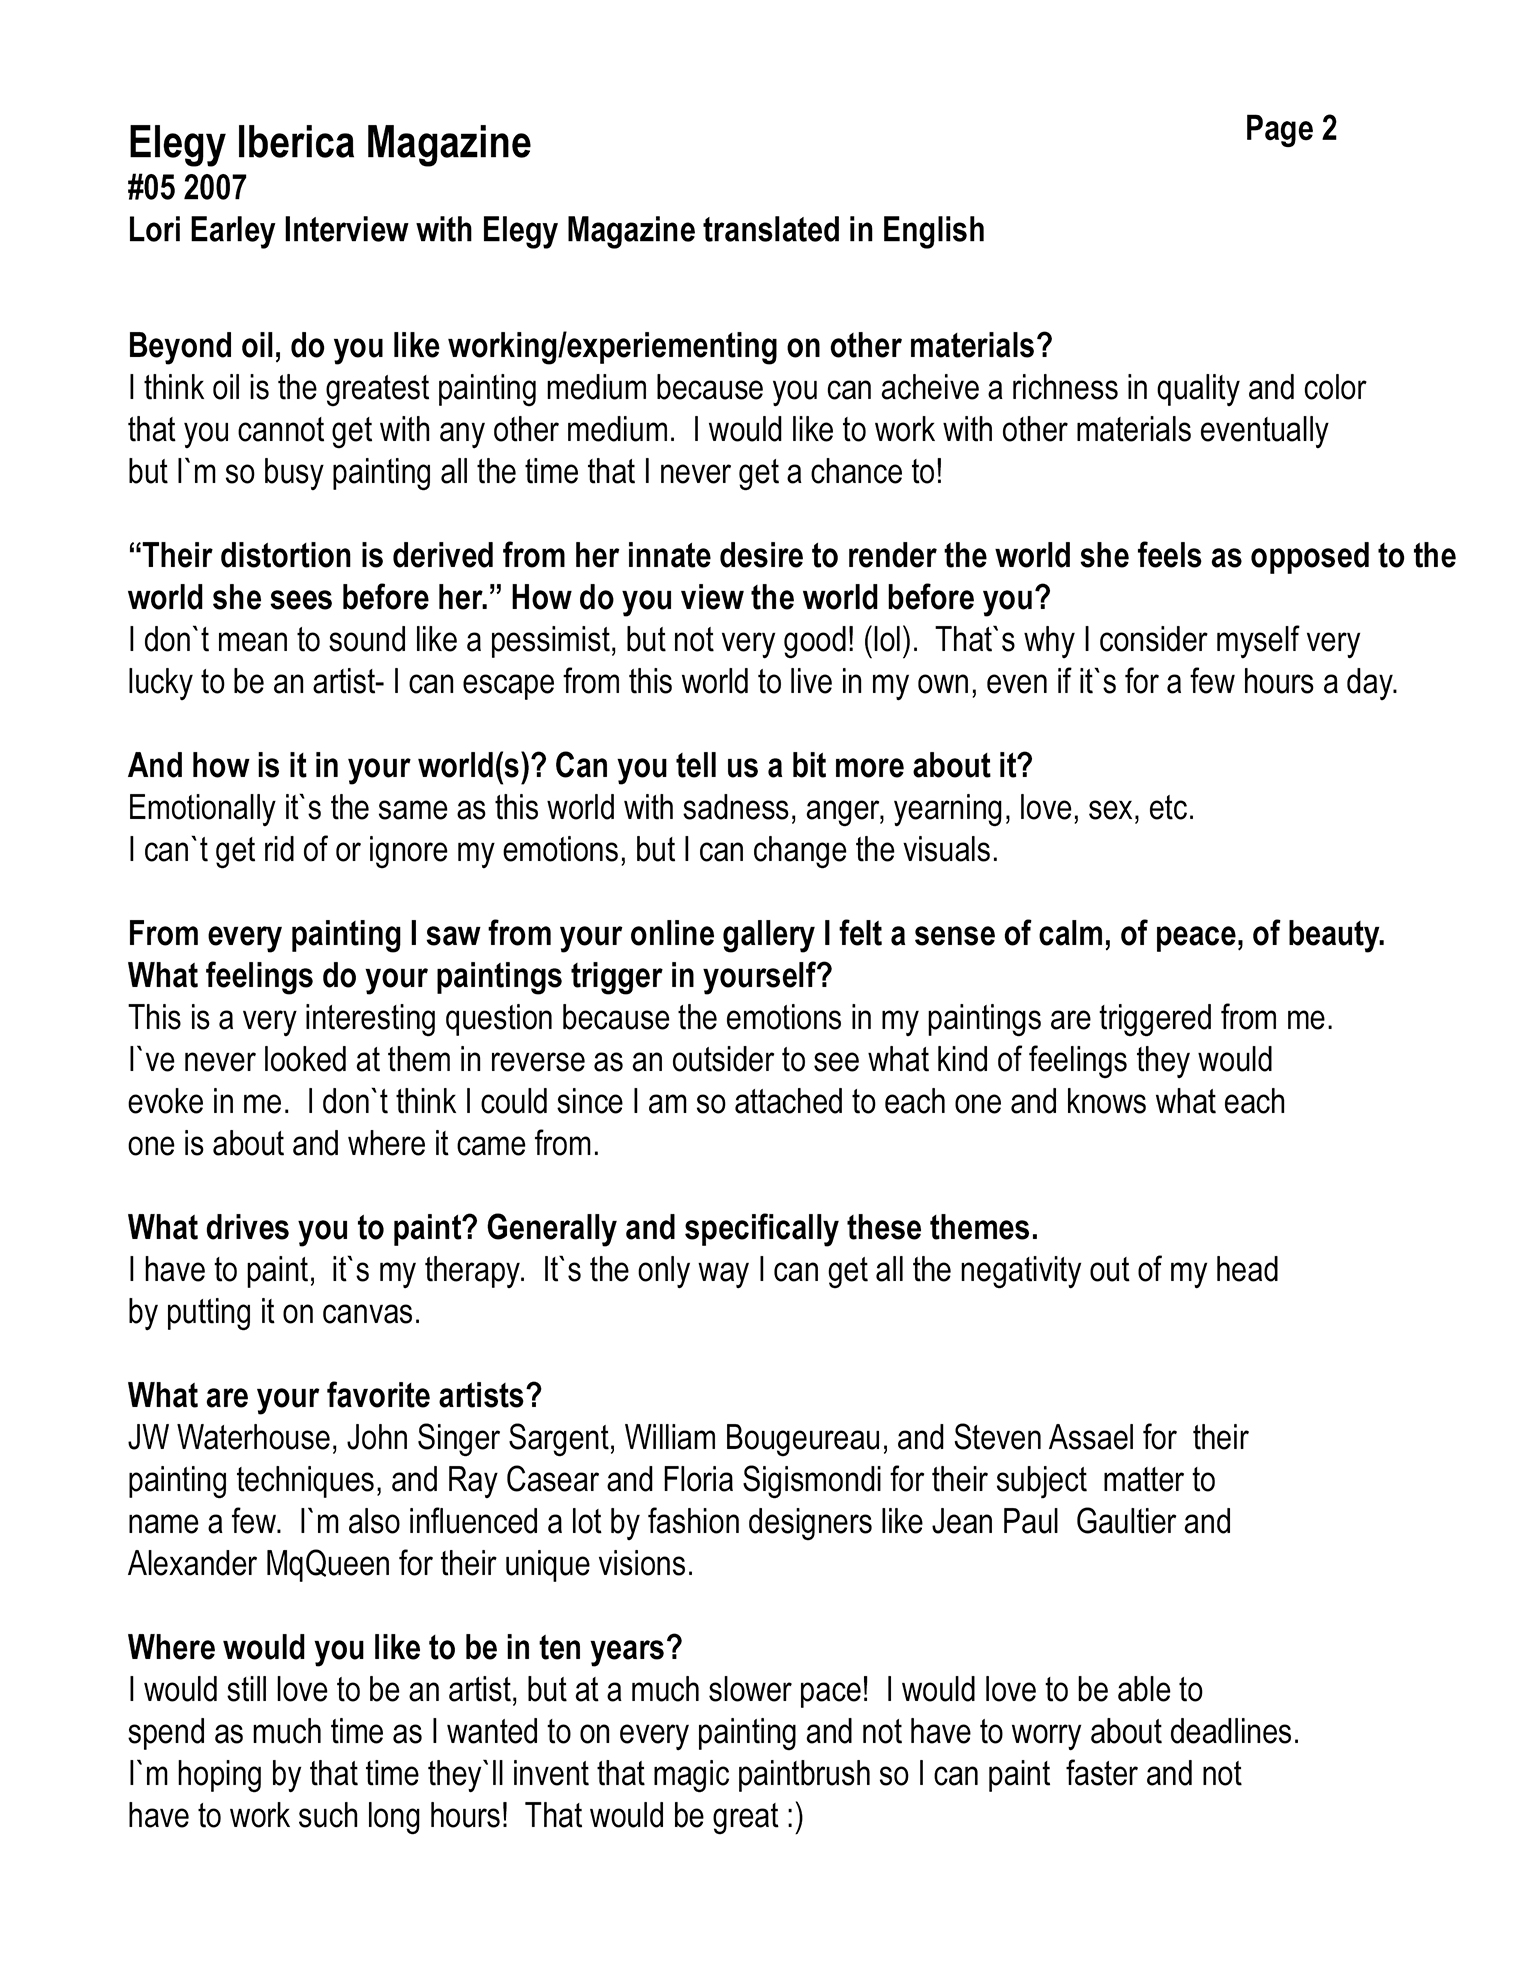 Elegy Iberica Interview text Page 2S.jpg